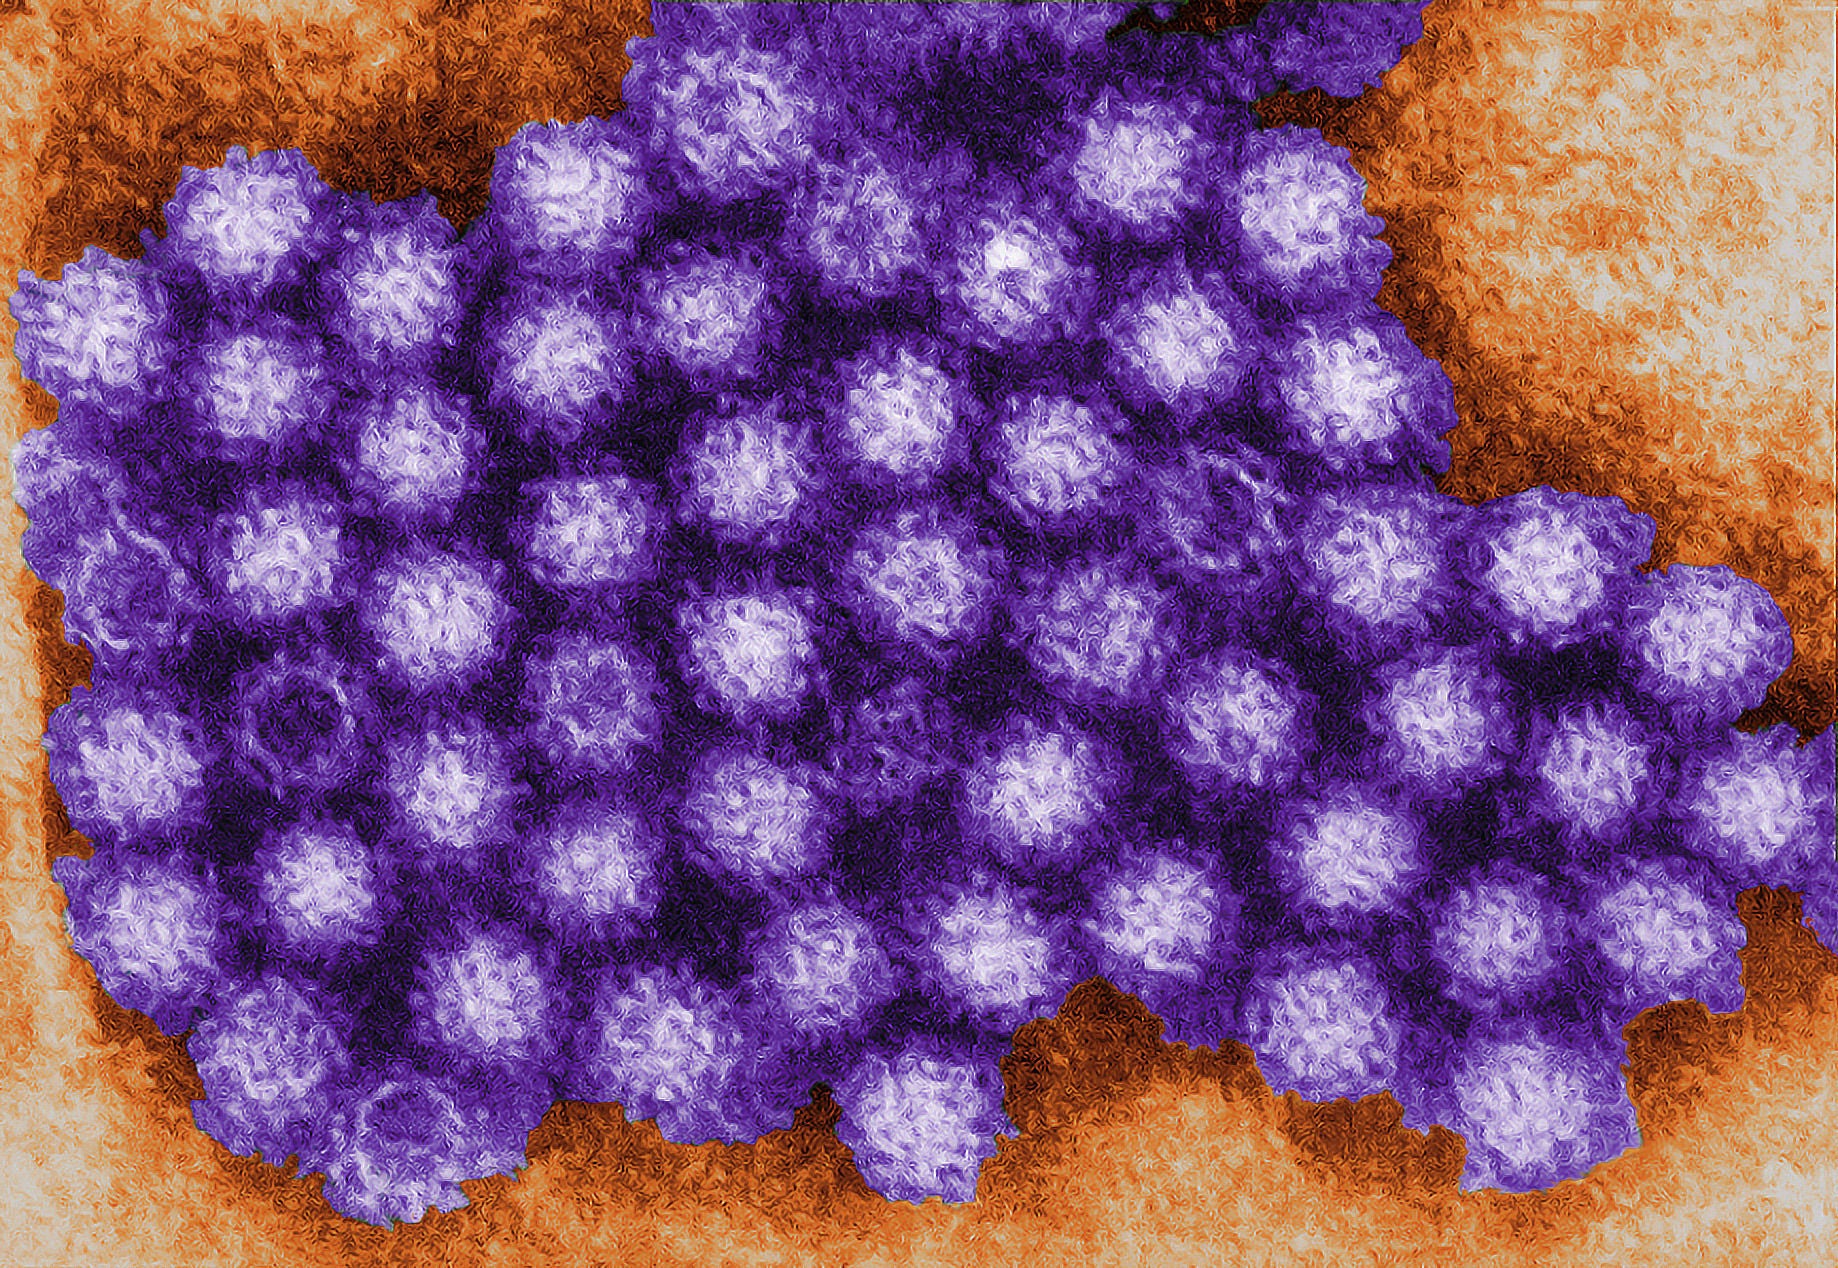 Norovirus (Charles D. Humphrey/Centres for Disease Control and Prevention/PA)